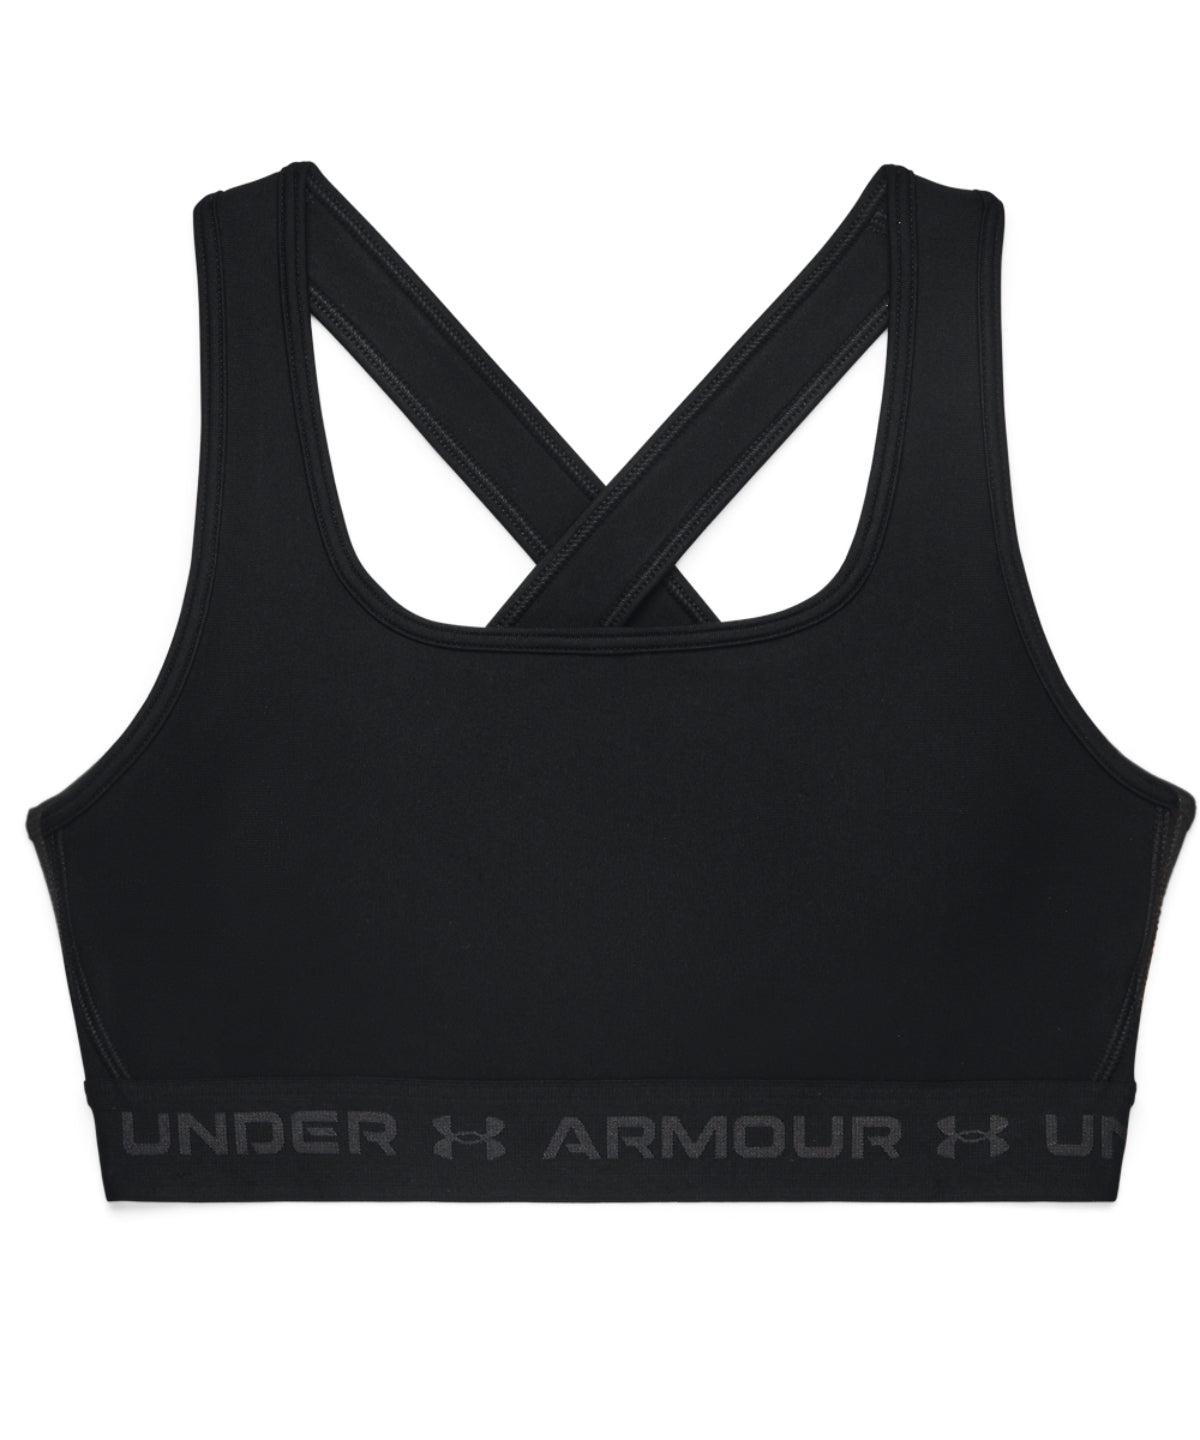 Under Armour Mid Crossback Womens Sports Bra Black Compression Removable Cups - Hamtons Direct